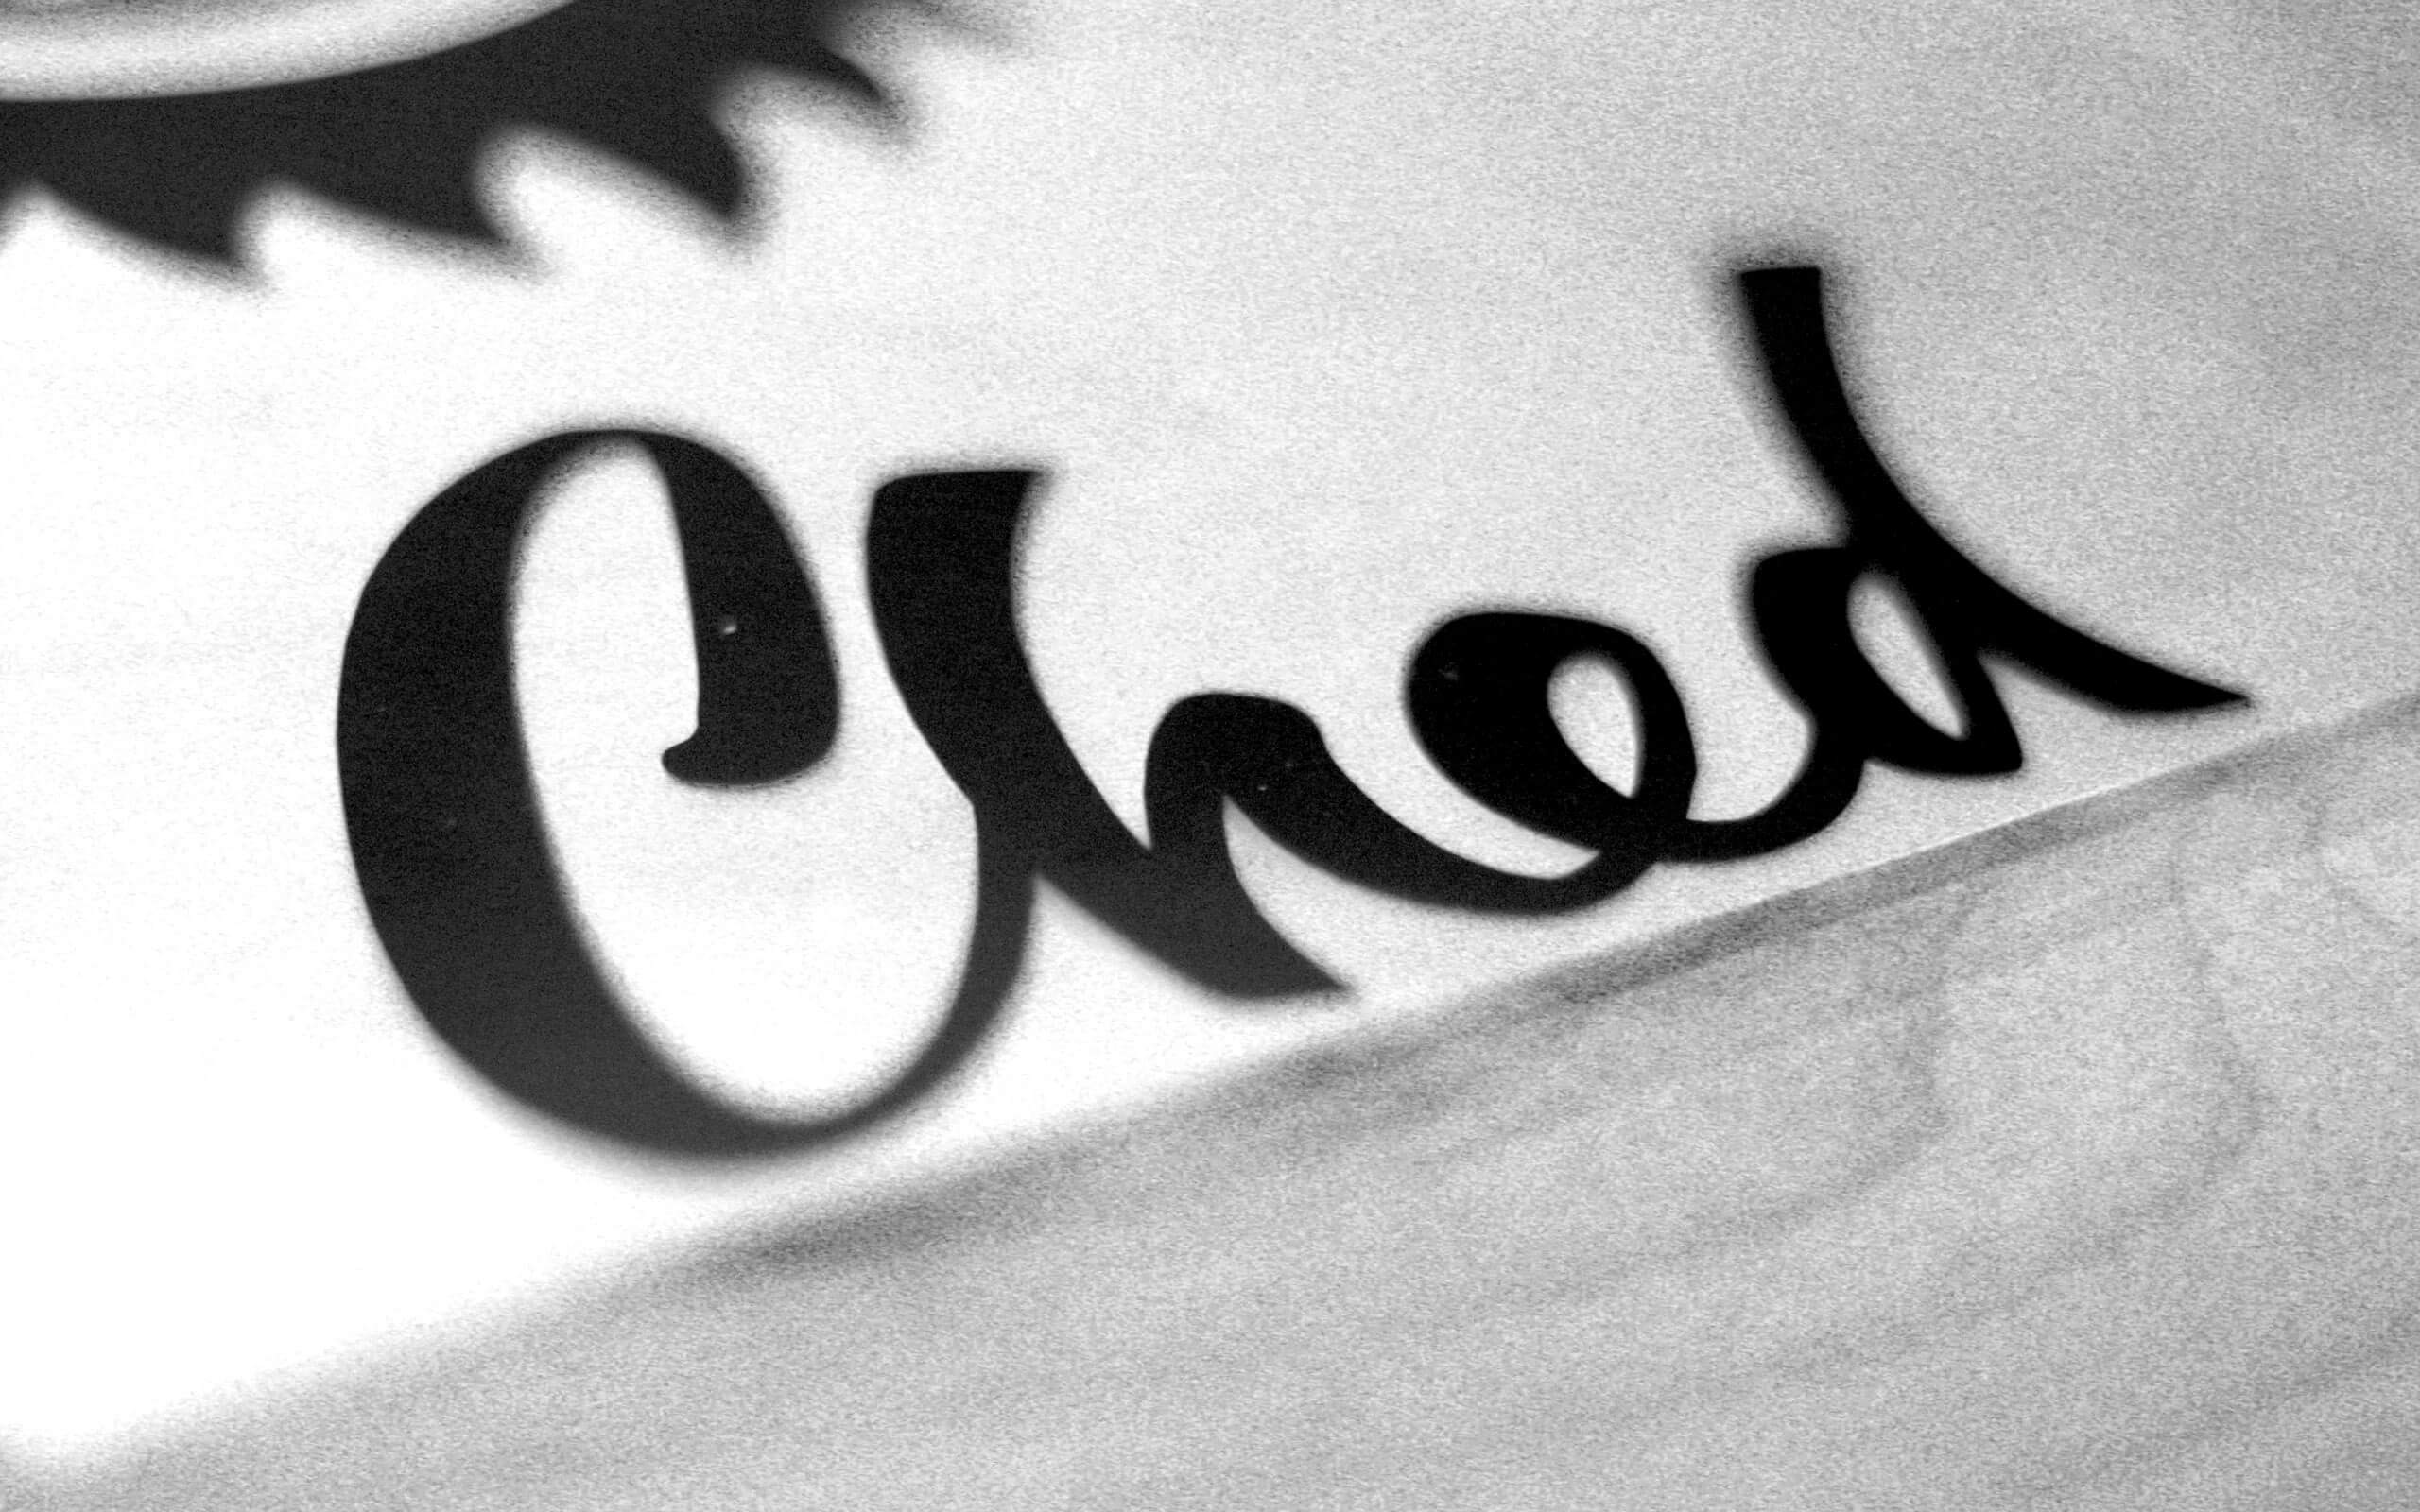 Ched Logo - El Ched logo